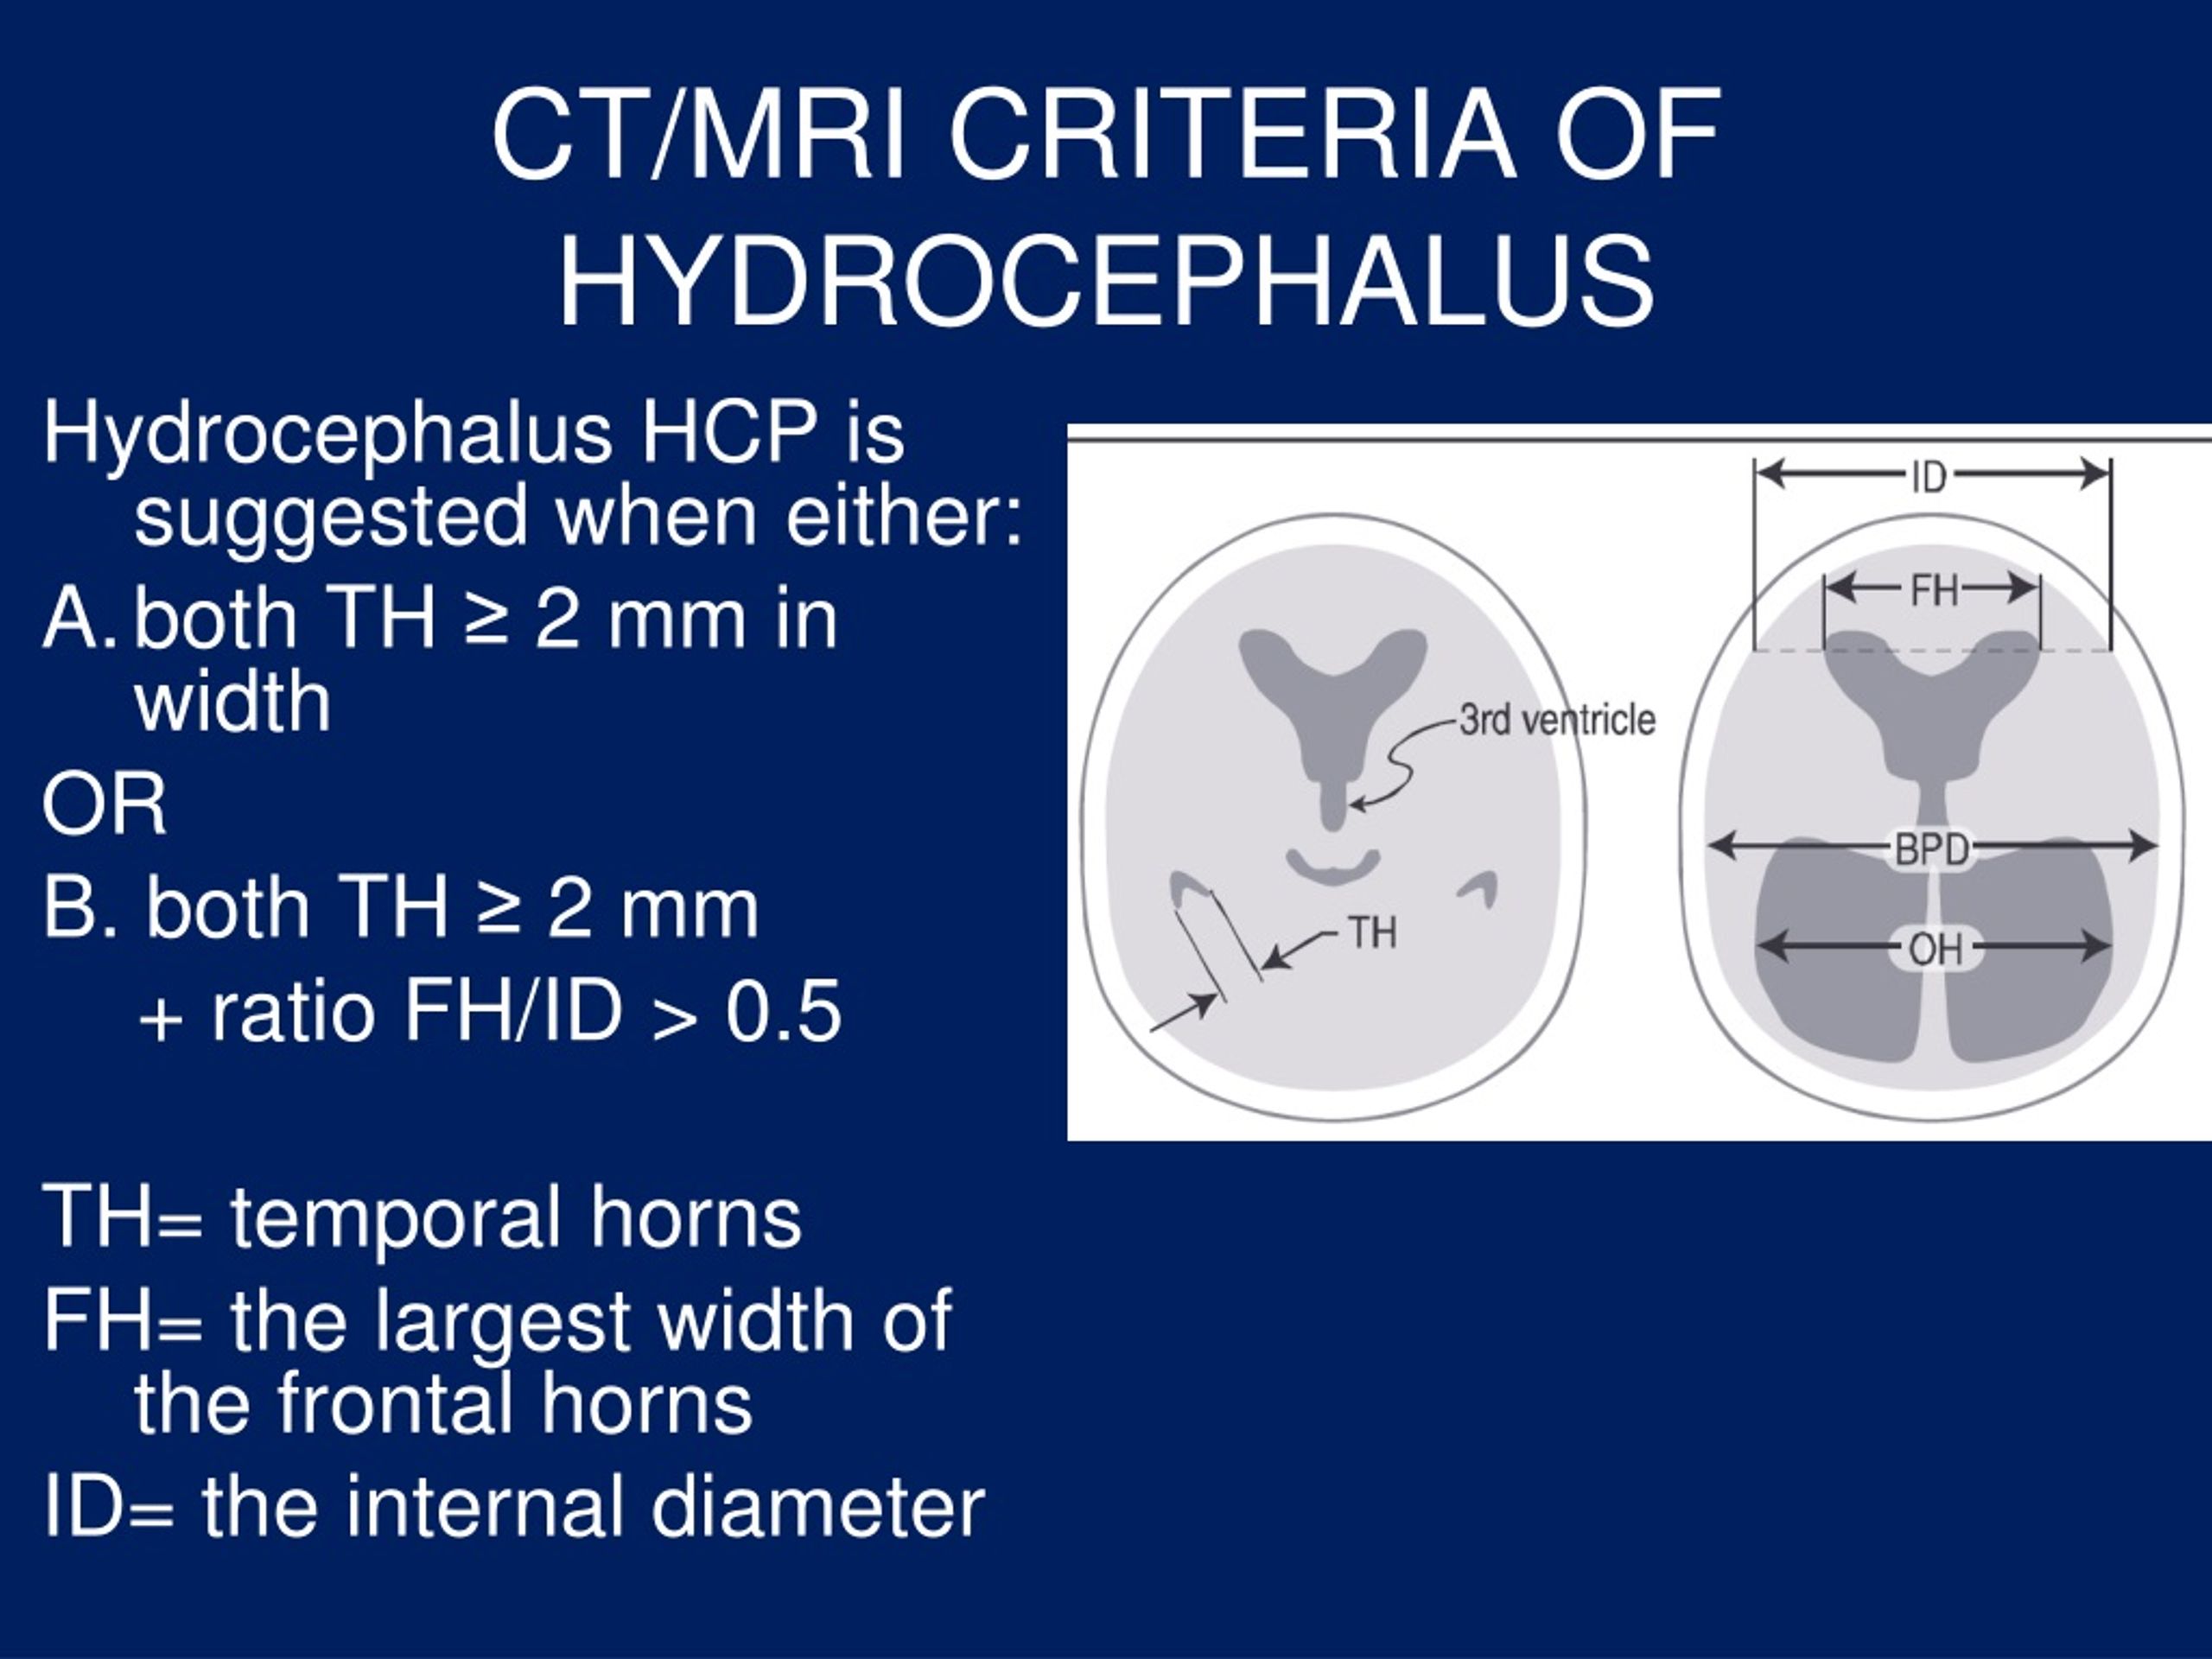 Ppt Hydrocephalus Ventriculo Peritoneal Shunt Powerpoint Presentation Id9224266 7775